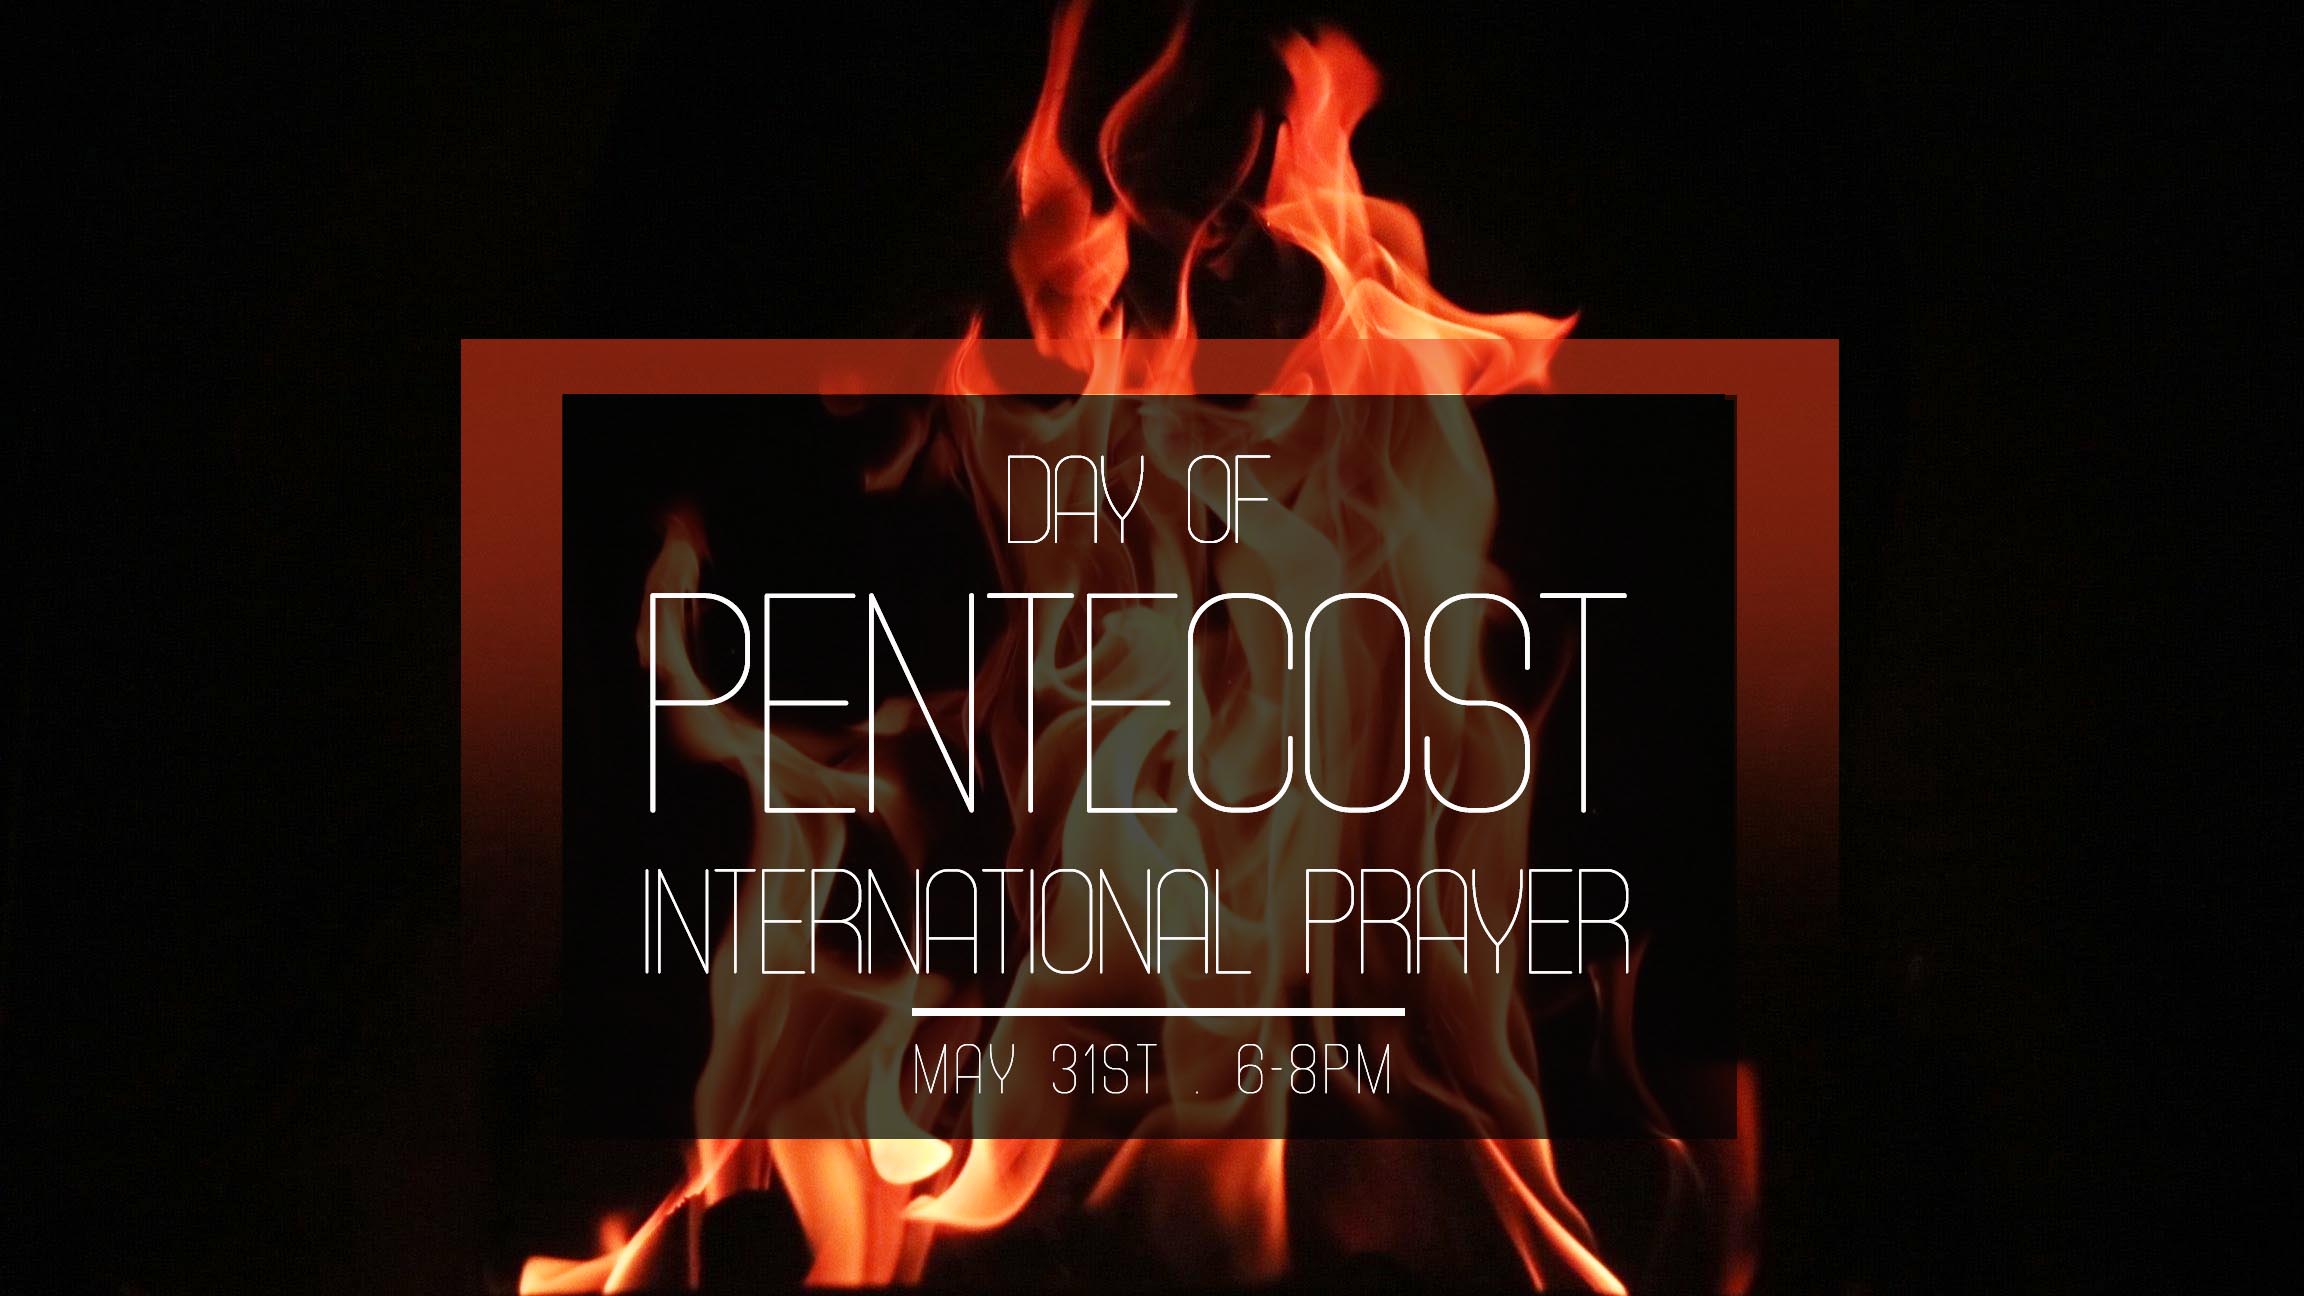 Day of Pentecost International Prayer The Father's House Church in